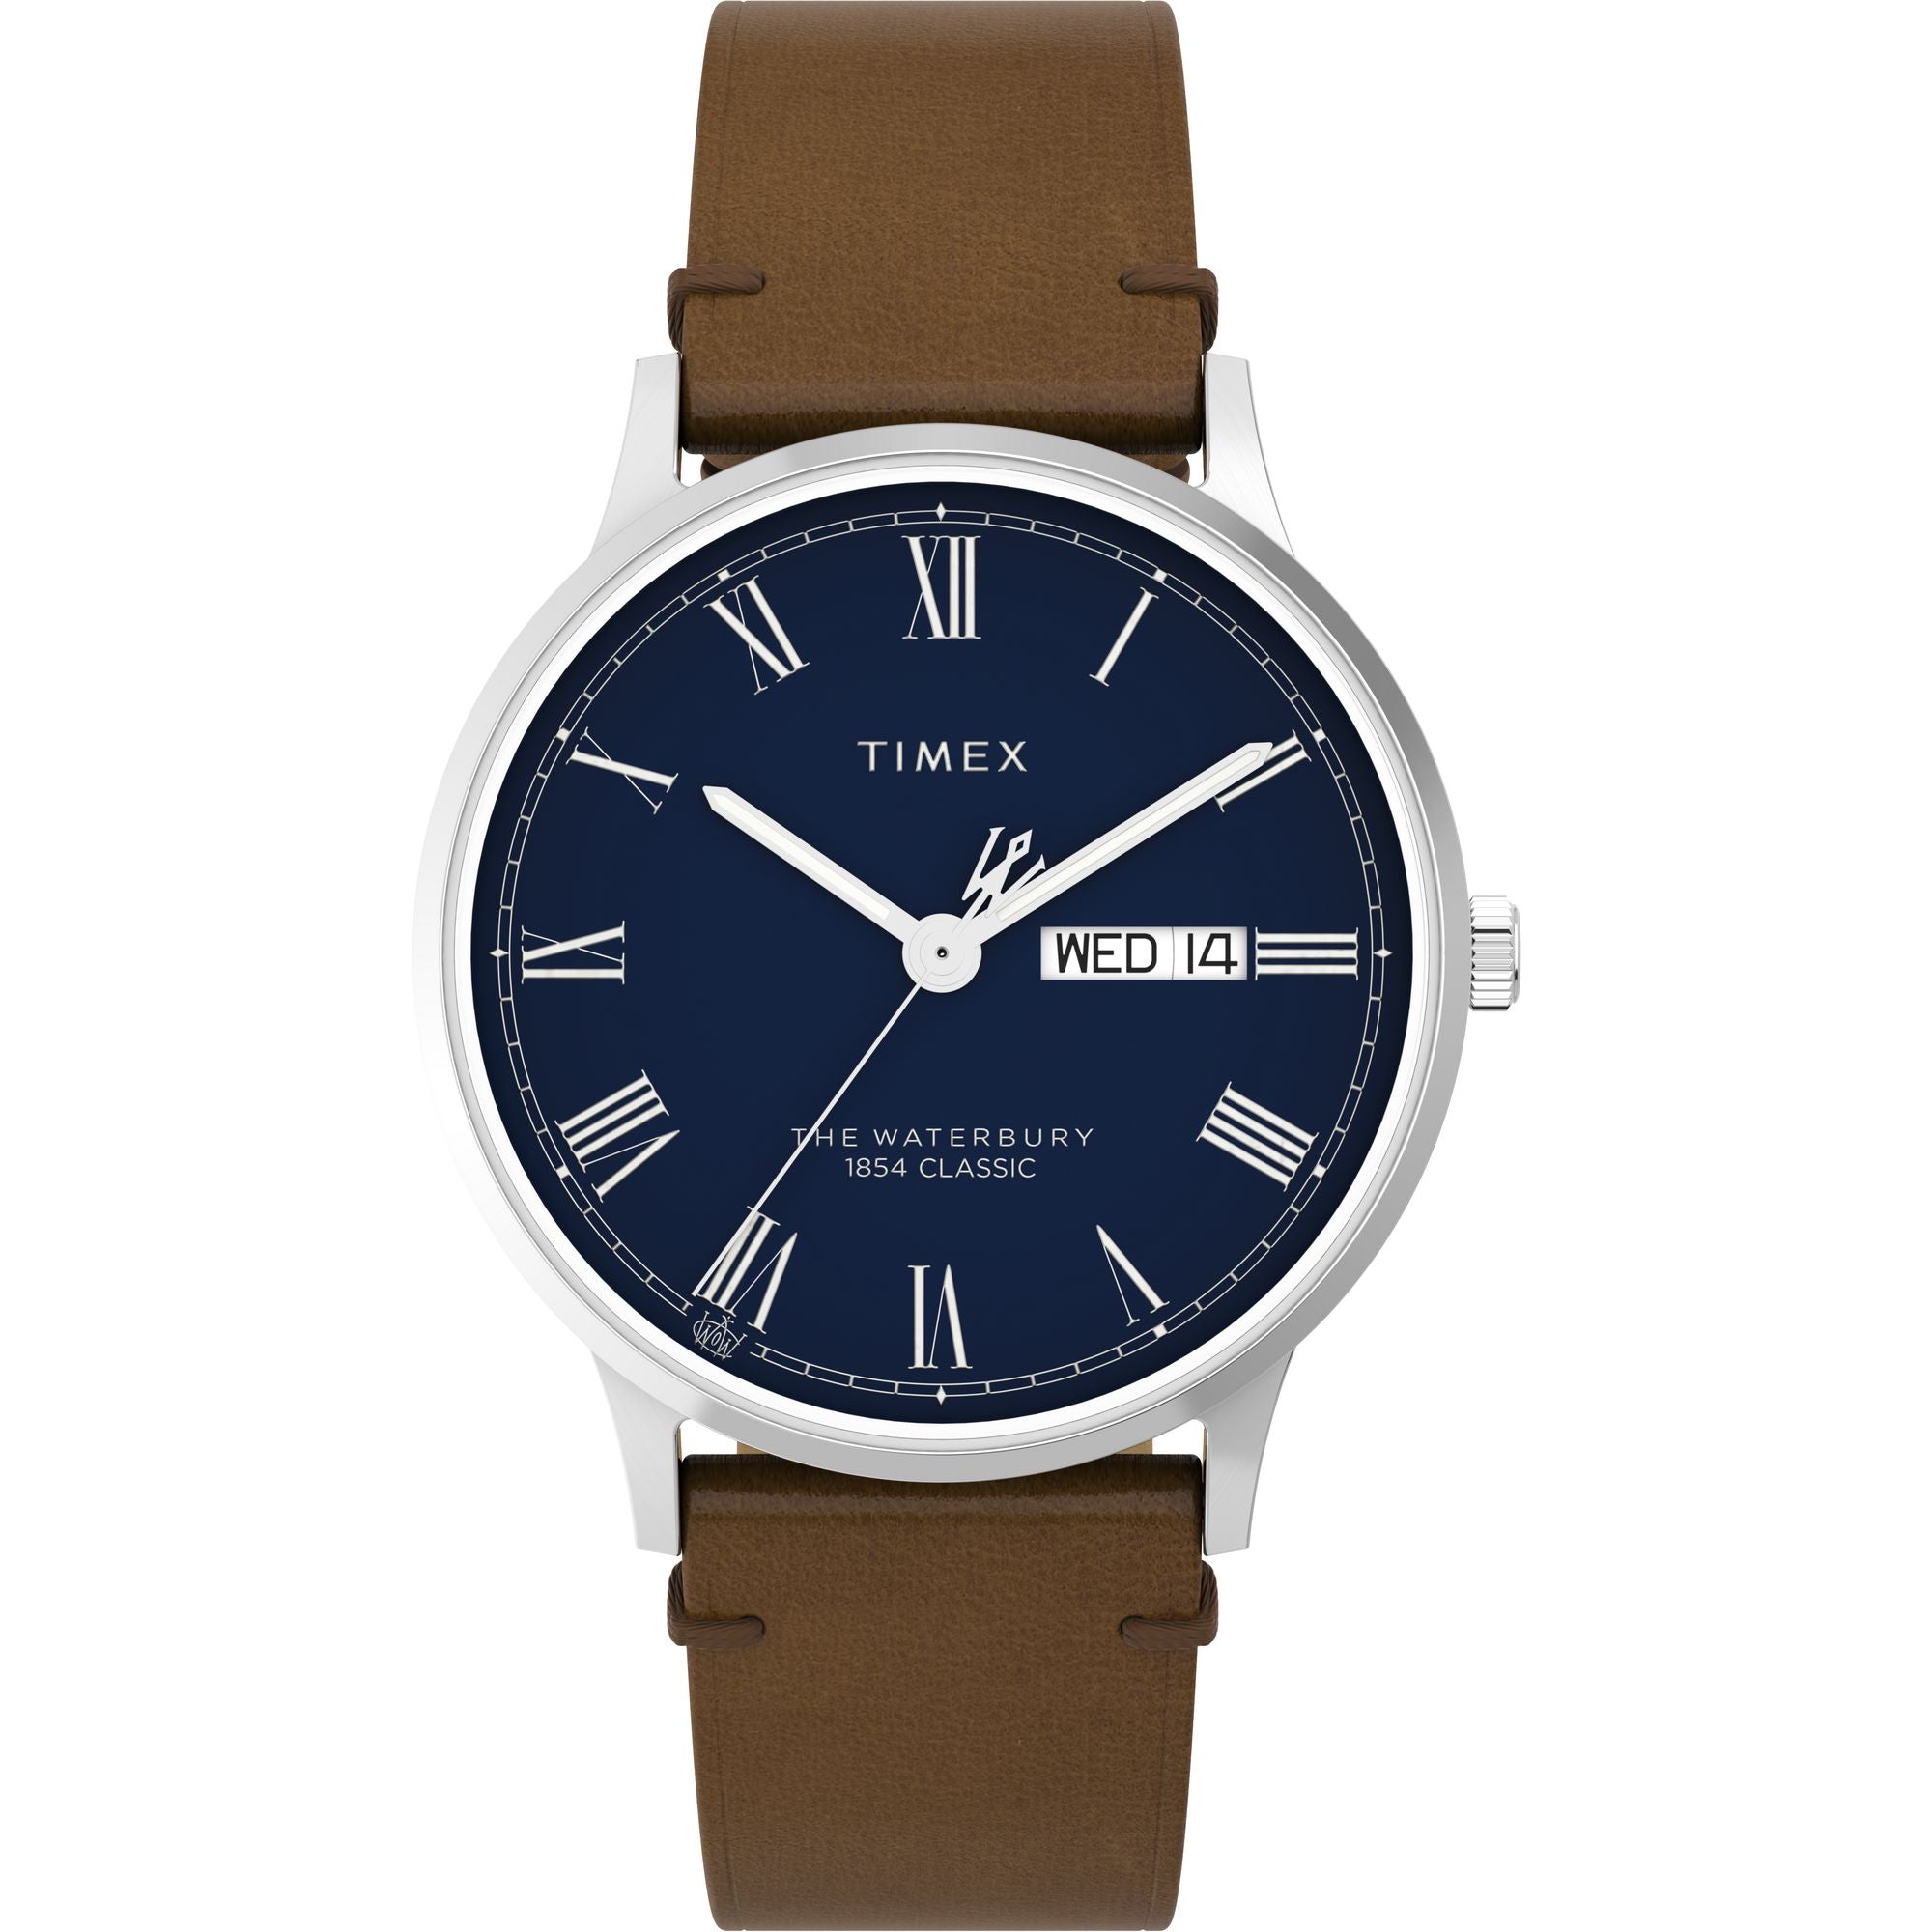 Tenx Day & Date Display Analog Watch - For Men - Buy Tenx Day & Date  Display Analog Watch - For Men TM-196 Online at Best Prices in India |  Flipkart.com